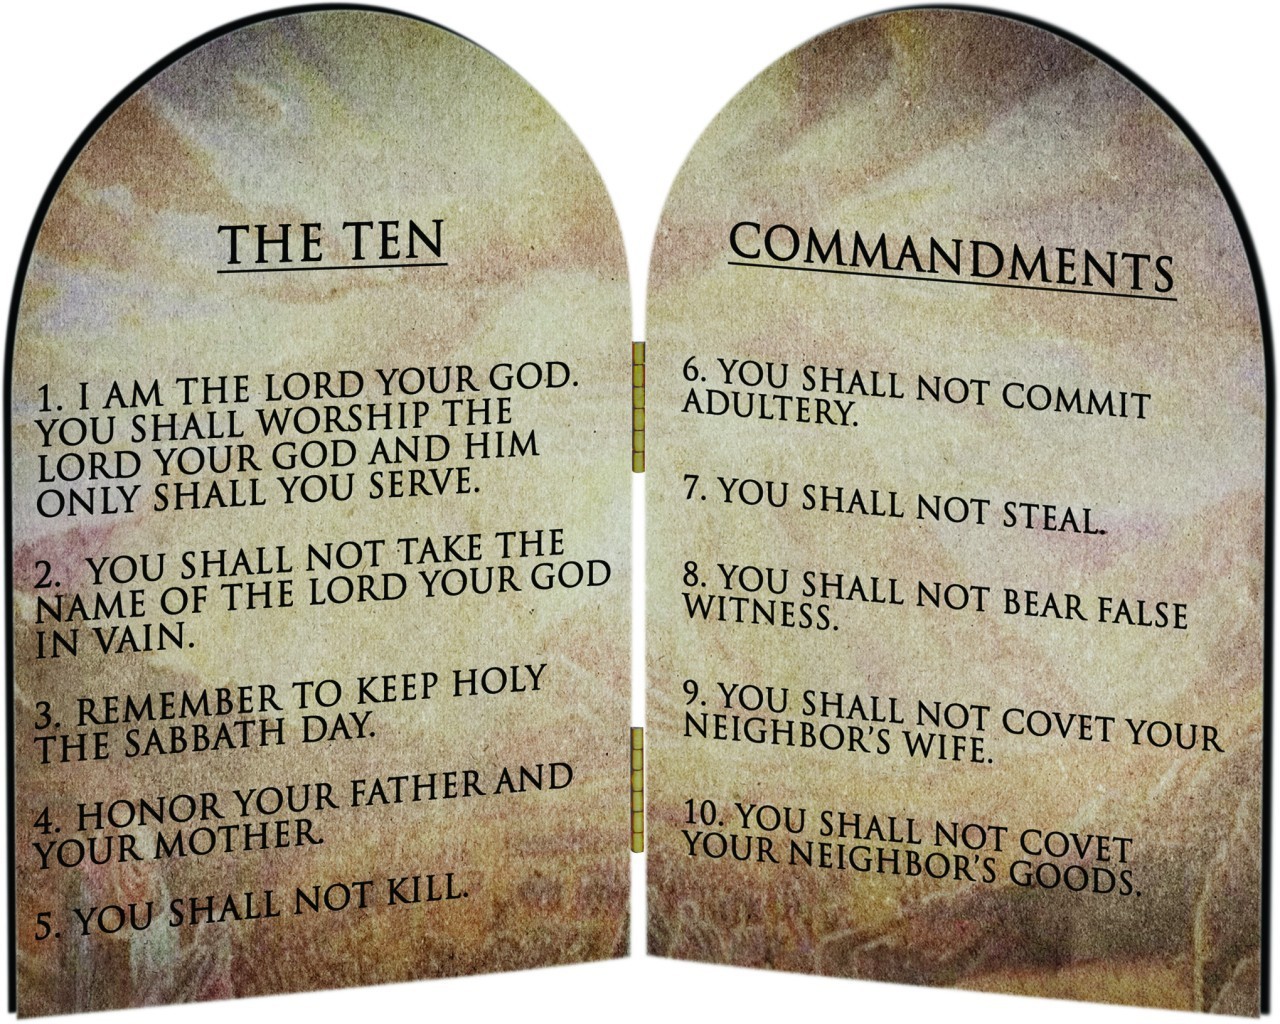 Why know the Ten Commandments? Catholic Telegraph